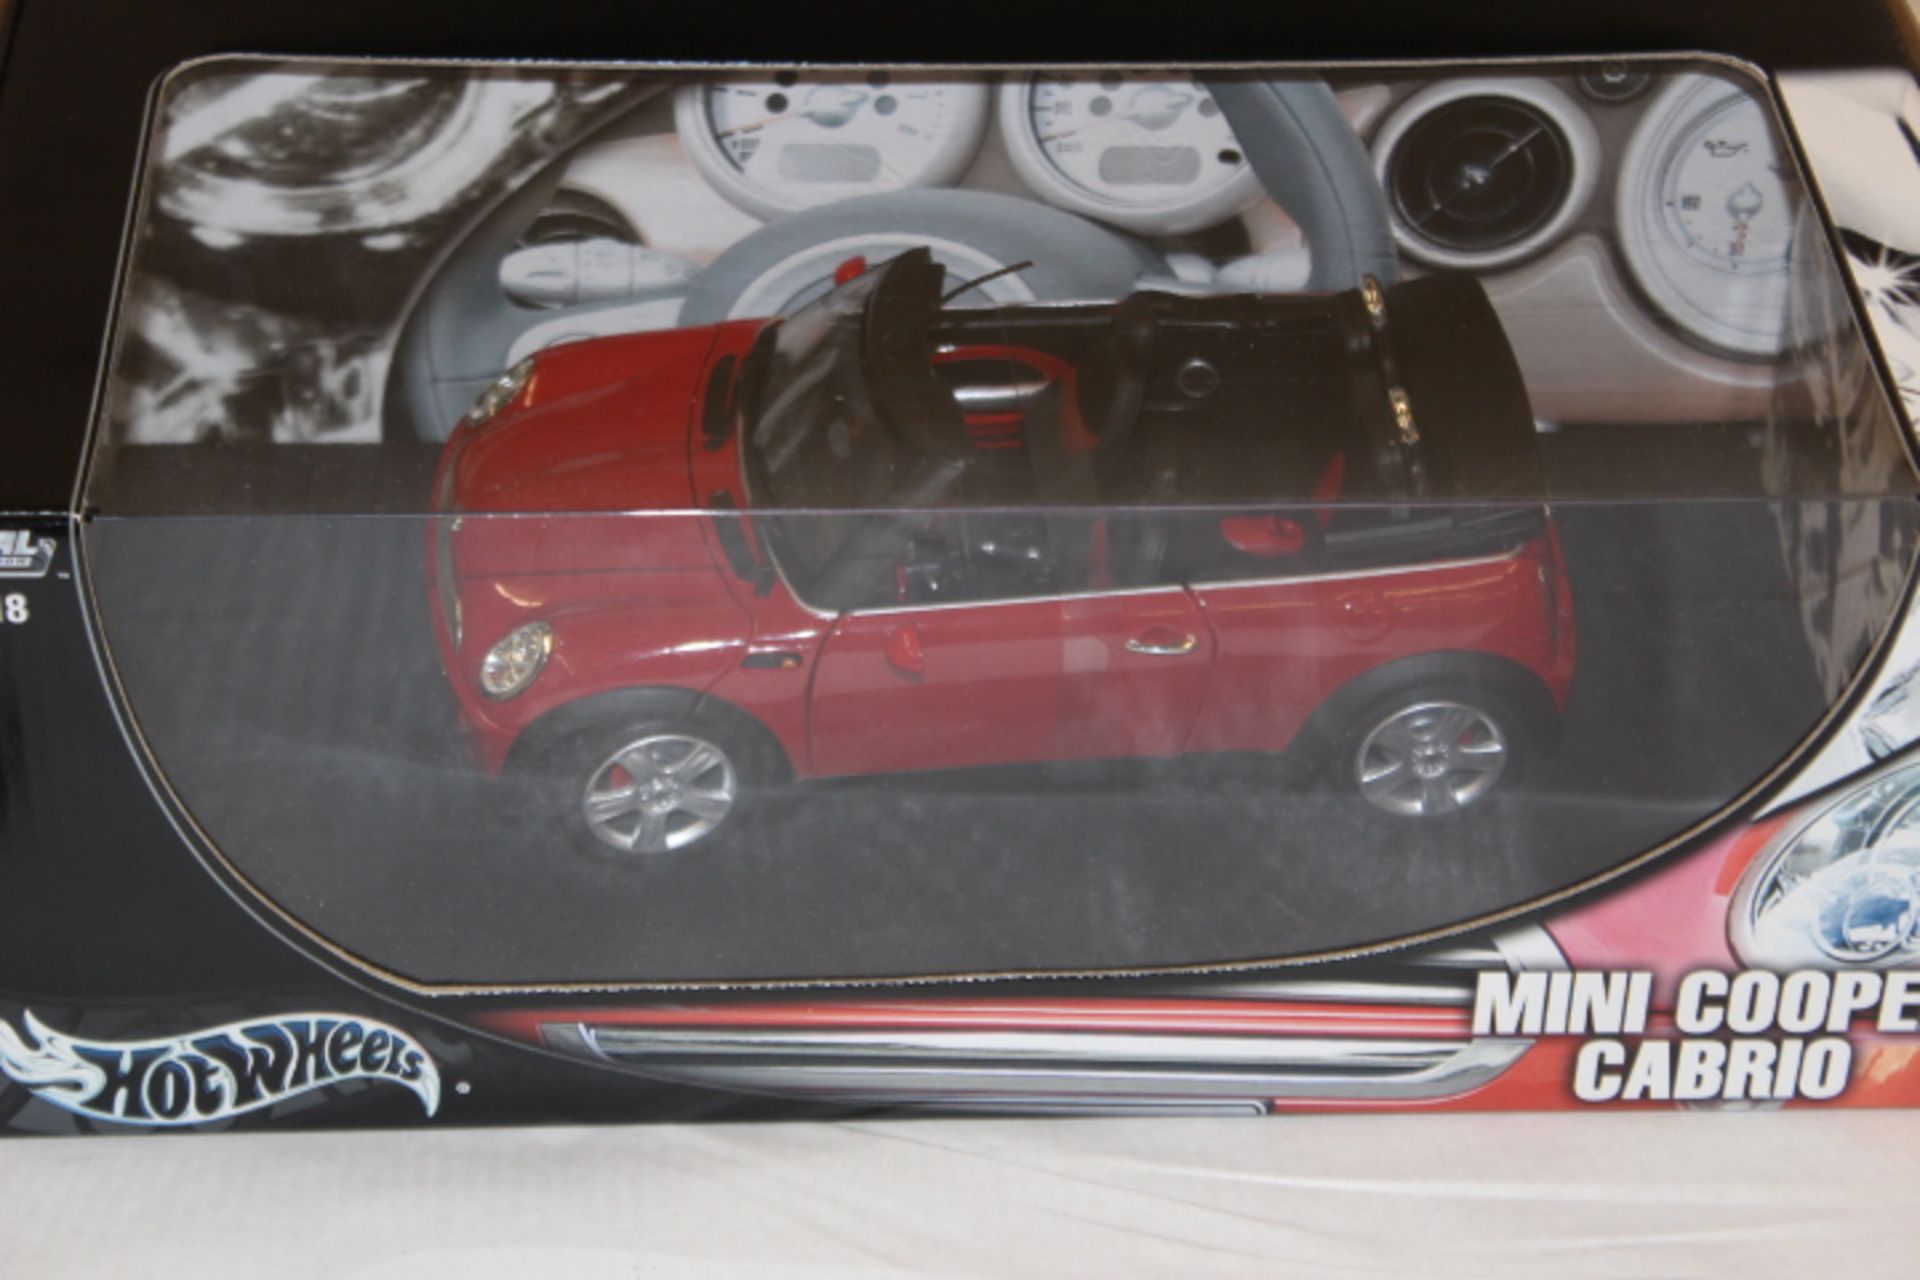 Hot Wheels Mini Cooper Cabrio die cast metal collection scale 1:18 - Image 2 of 2